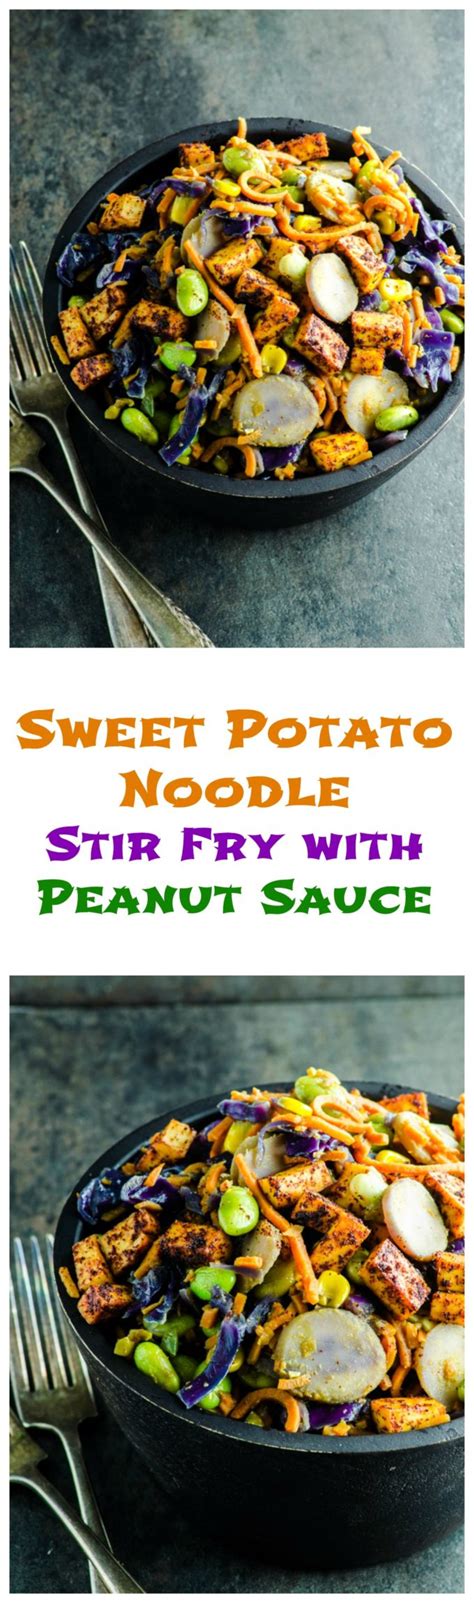 The thinner the sticks, the crispier the fry, so keep that in mind when chopping them. Sweet Potato Noodles Stir Fry with Peanut Sauce - May I ...